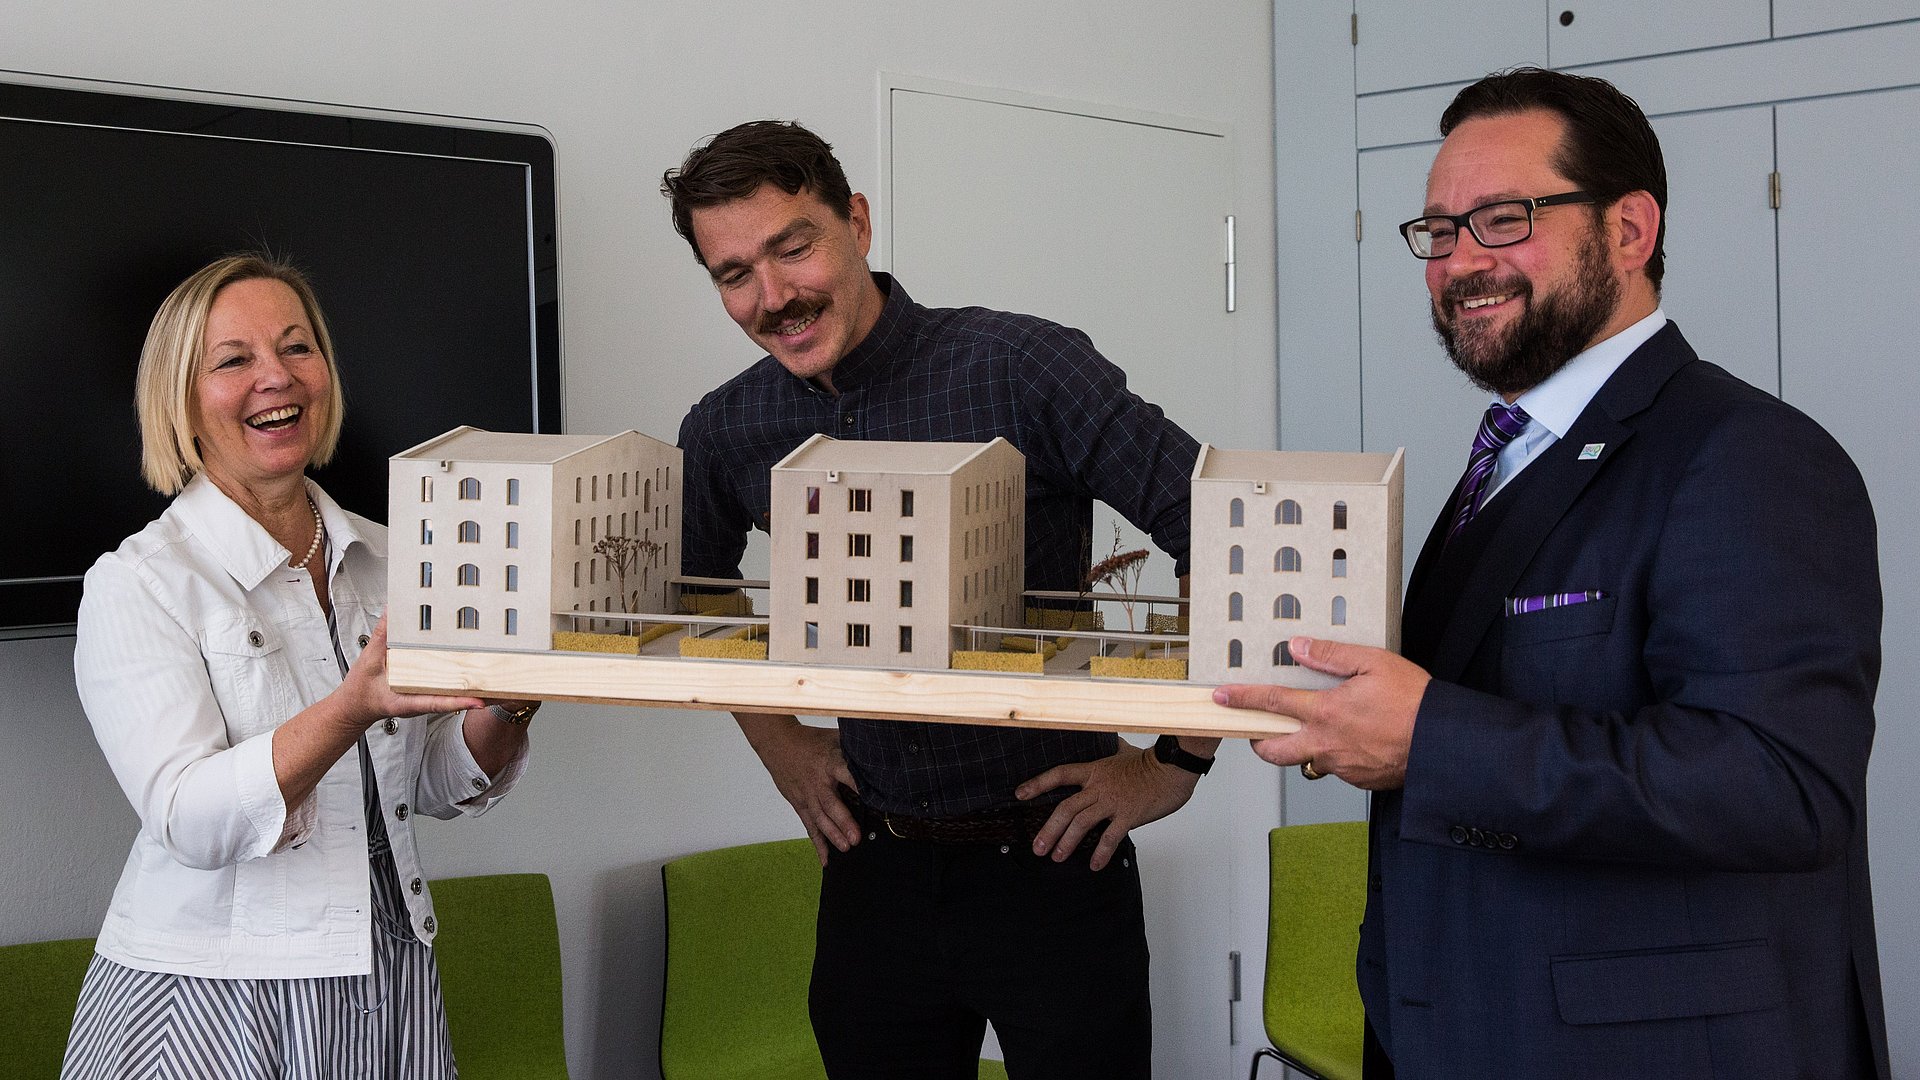 Dr. Ursula Wurzer-Faßnacht, architect Tilmann Jarmer and Alexander Bonde (from left to right) with a model of the houses in Garching.